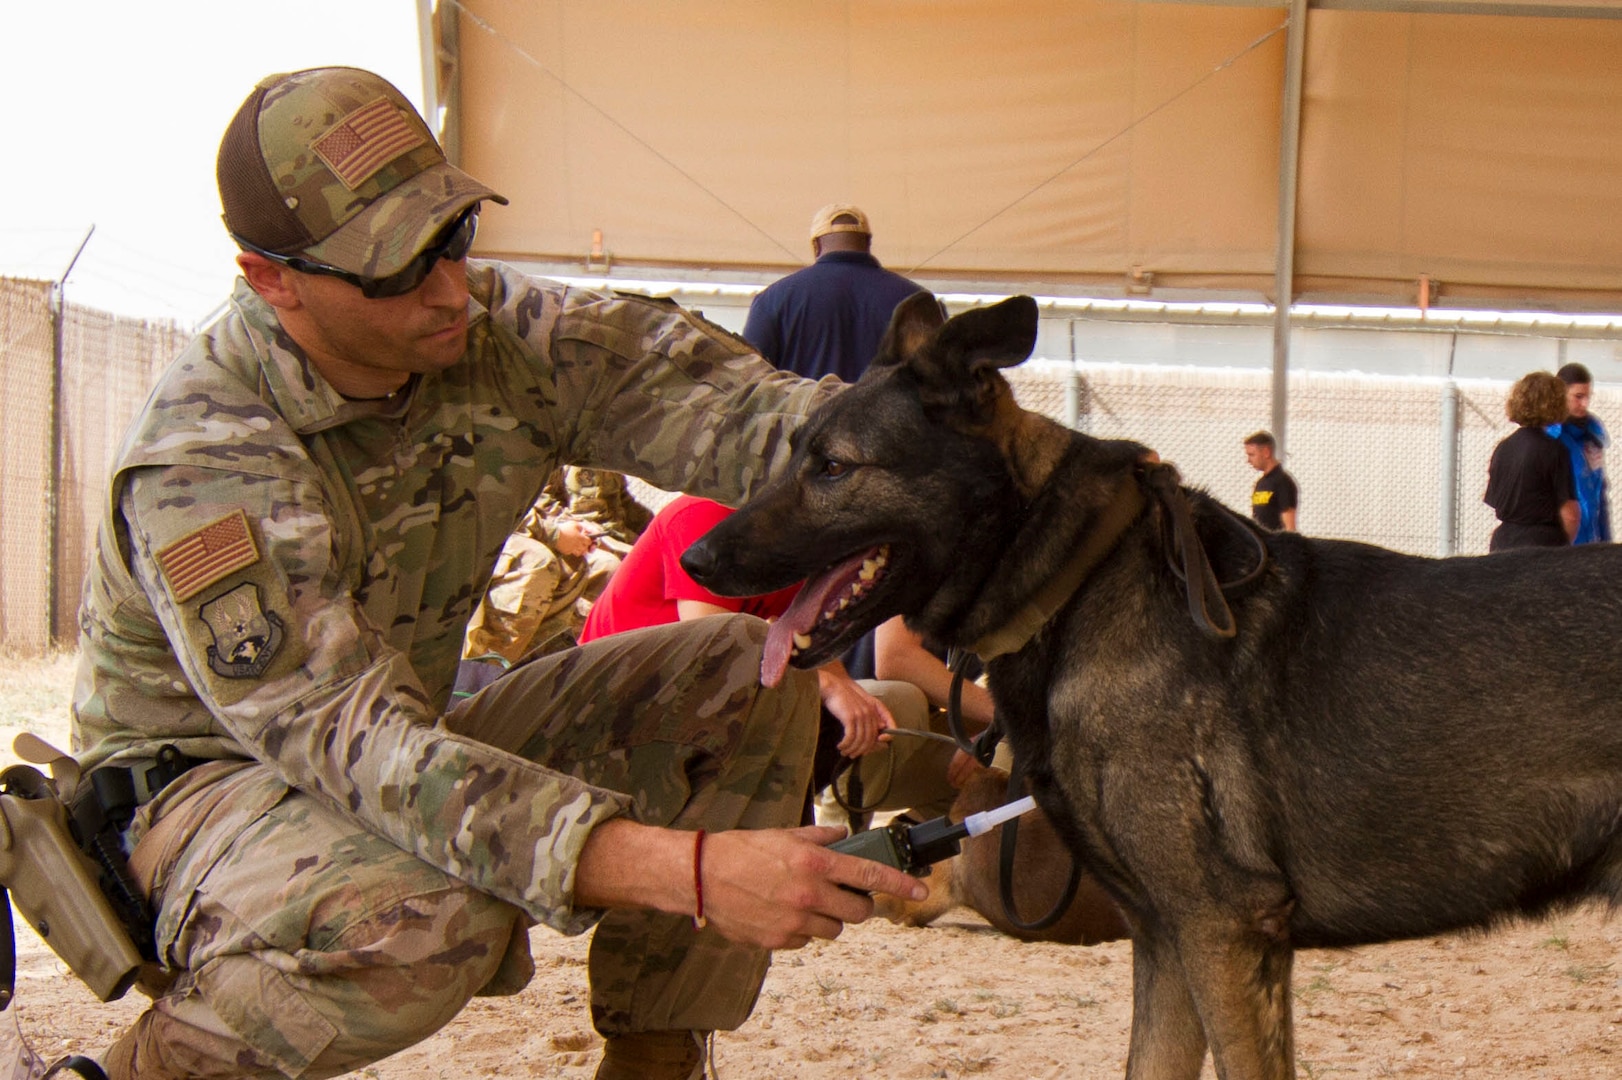 Air Force Staff Sgt. Cory Ruge, military working dog handler, 386th Expeditionary Security Forces Squadron, screens military working dog, Rogane, a German Shepherd who does single purpose explosive detection, during Chemical, Biological, Radiological, or Nuclear (CBRN) decontamination training in Kuwait, April 11, 2019. Members of the 637th Chemical Company, the 719th Medical Detachment Veterinary Service Support, and the 386th Expeditionary Security Forces Squadron came together to conduct a live exercise to train to save the lives of military working dogs and their handlers in the event they were exposed to a CBRN substance. Live training events help prepare service members for real world events which may require them to recall the skills they learned in training to stay in the fight and survive.